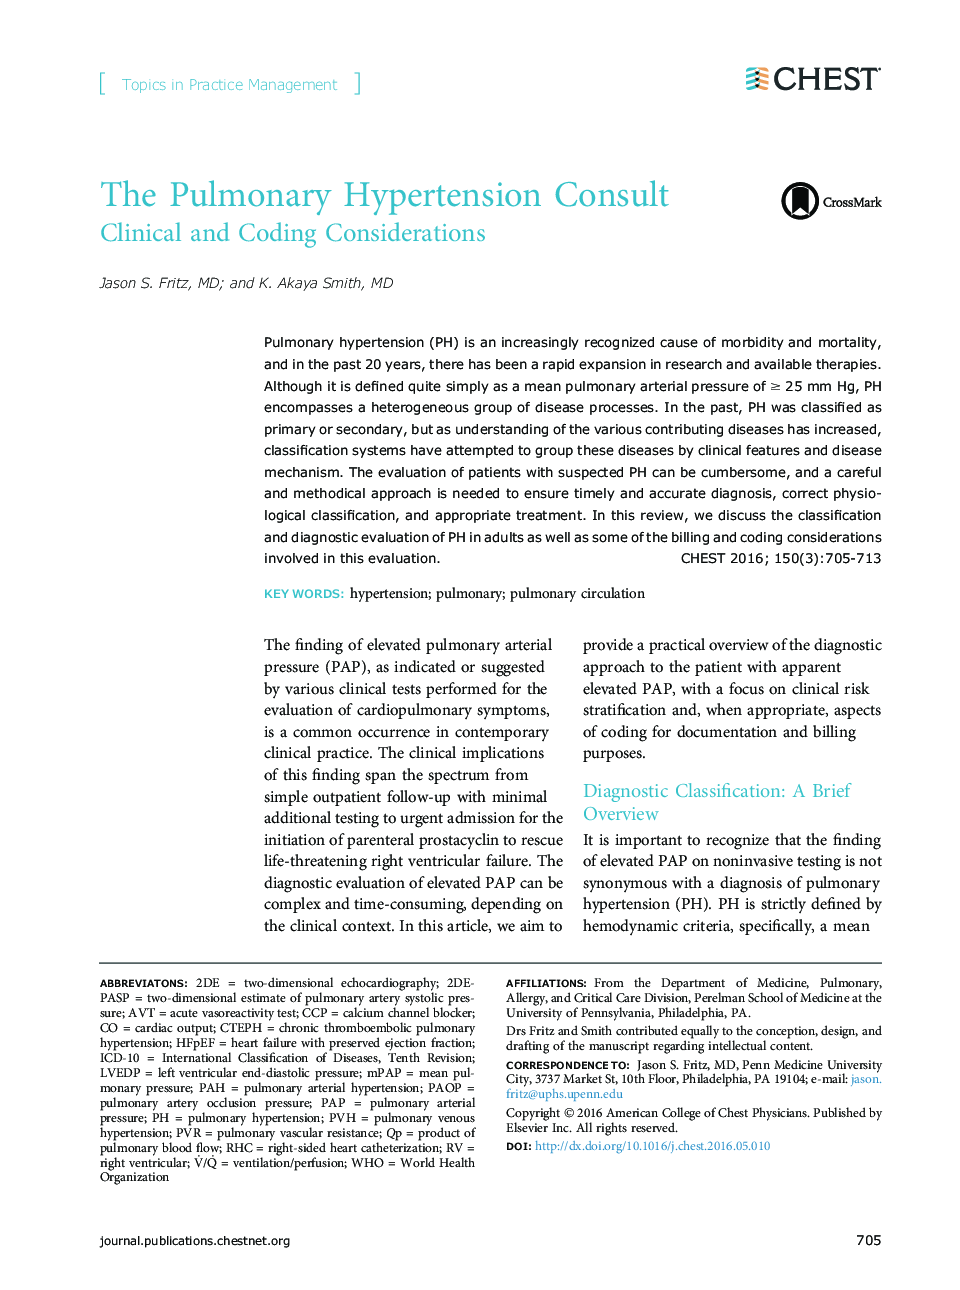 Topics in Practice ManagementThe Pulmonary Hypertension Consult: Clinical and Coding Considerations